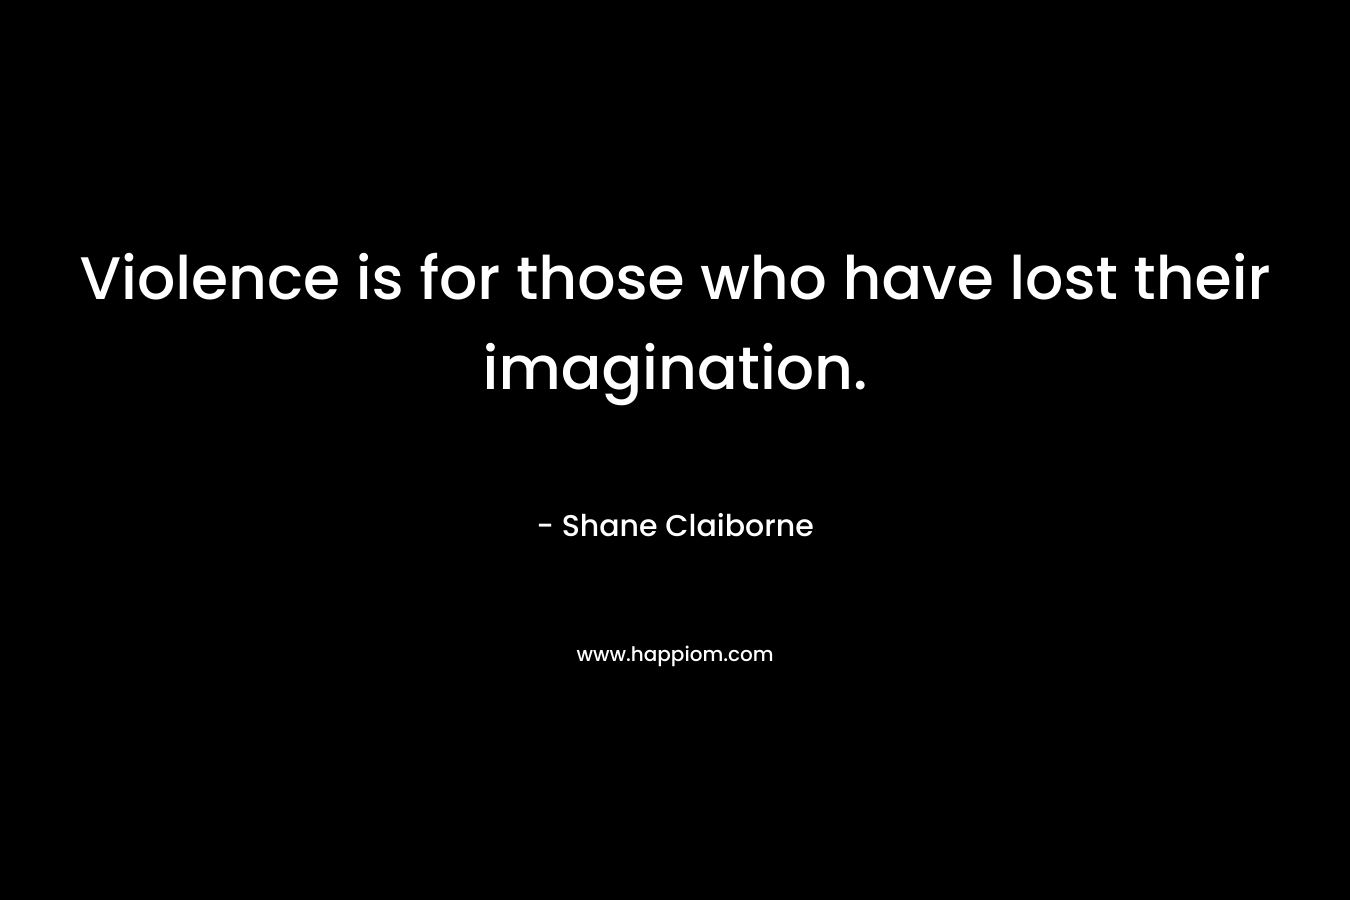 Violence is for those who have lost their imagination.